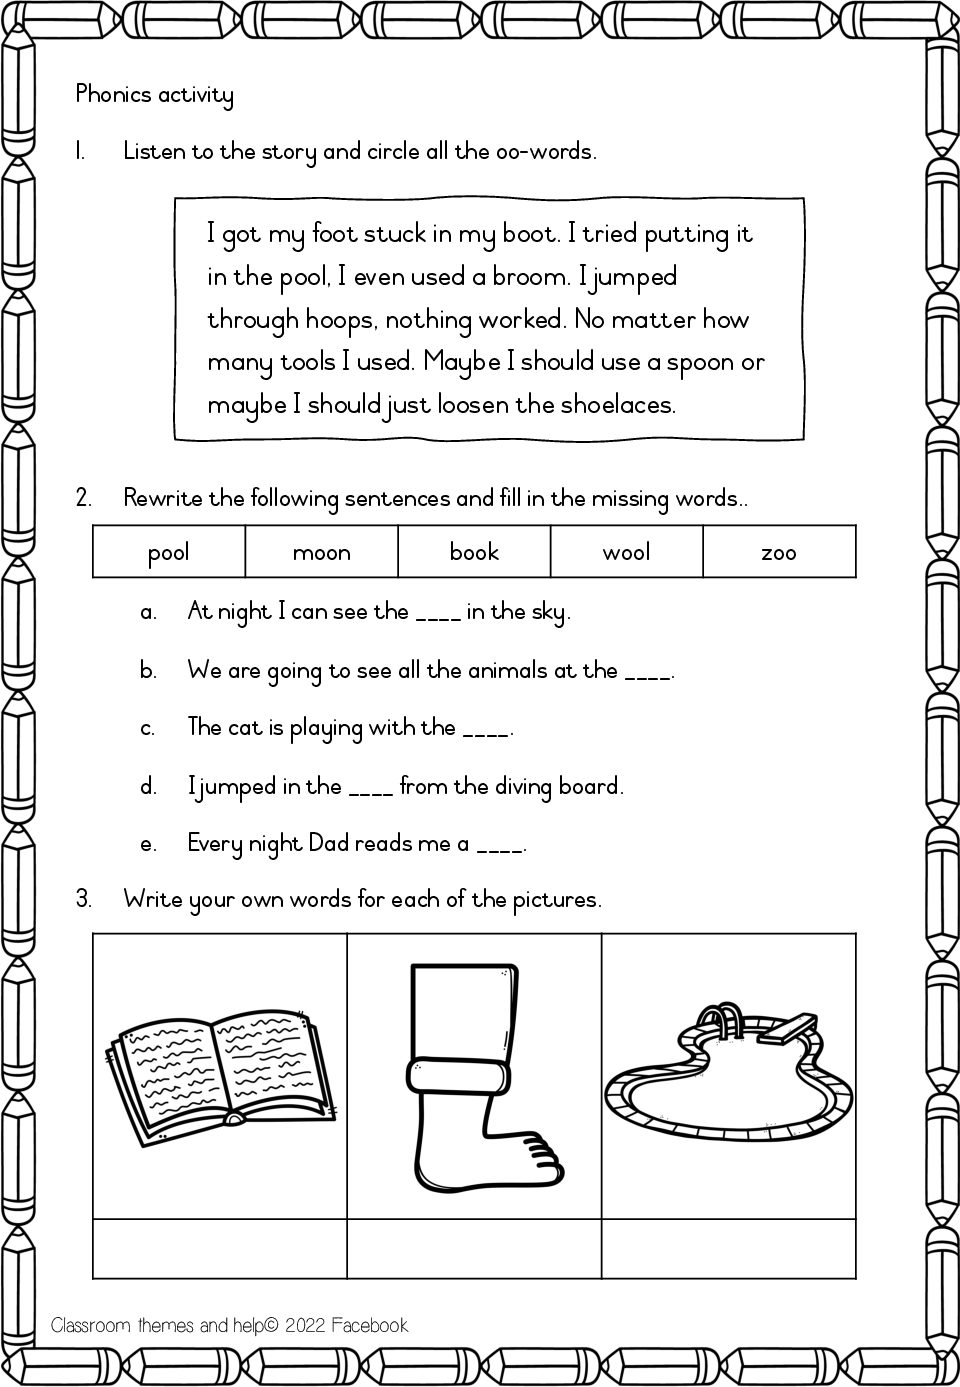 grade-3-english-worksheet-meaning-of-words-and-plurals-smartkids-grade-3-english-fal-workbook